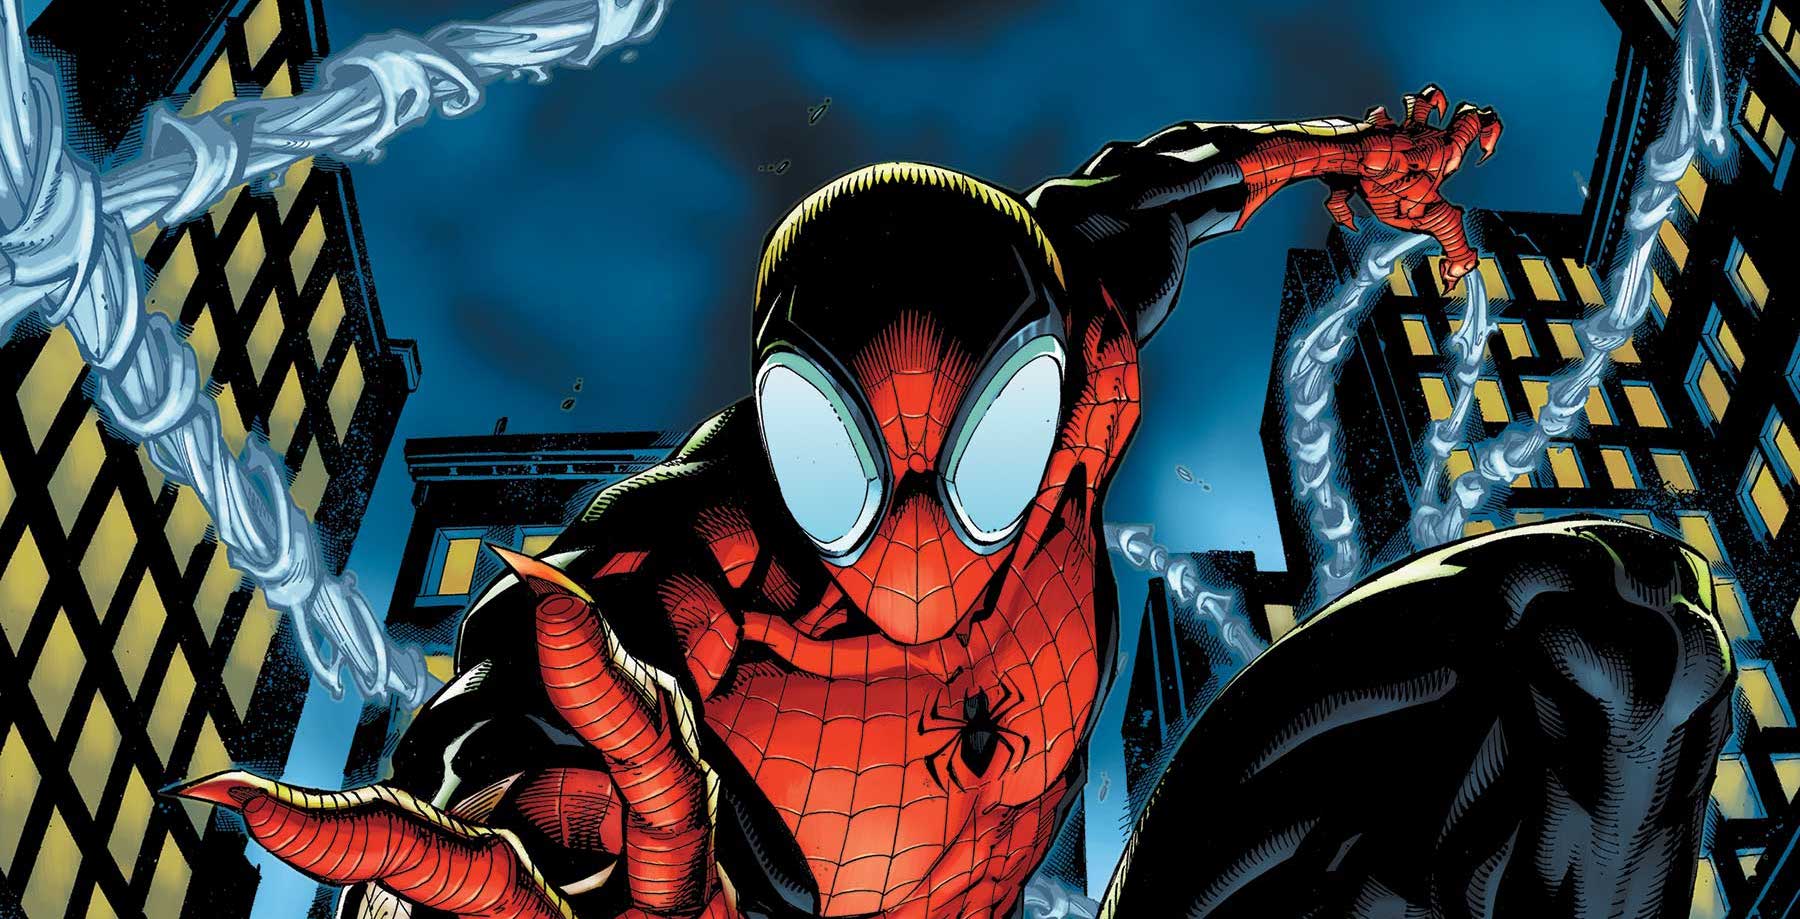 'Superior Spider-Man Returns' #1 is a nice return and a good origin story